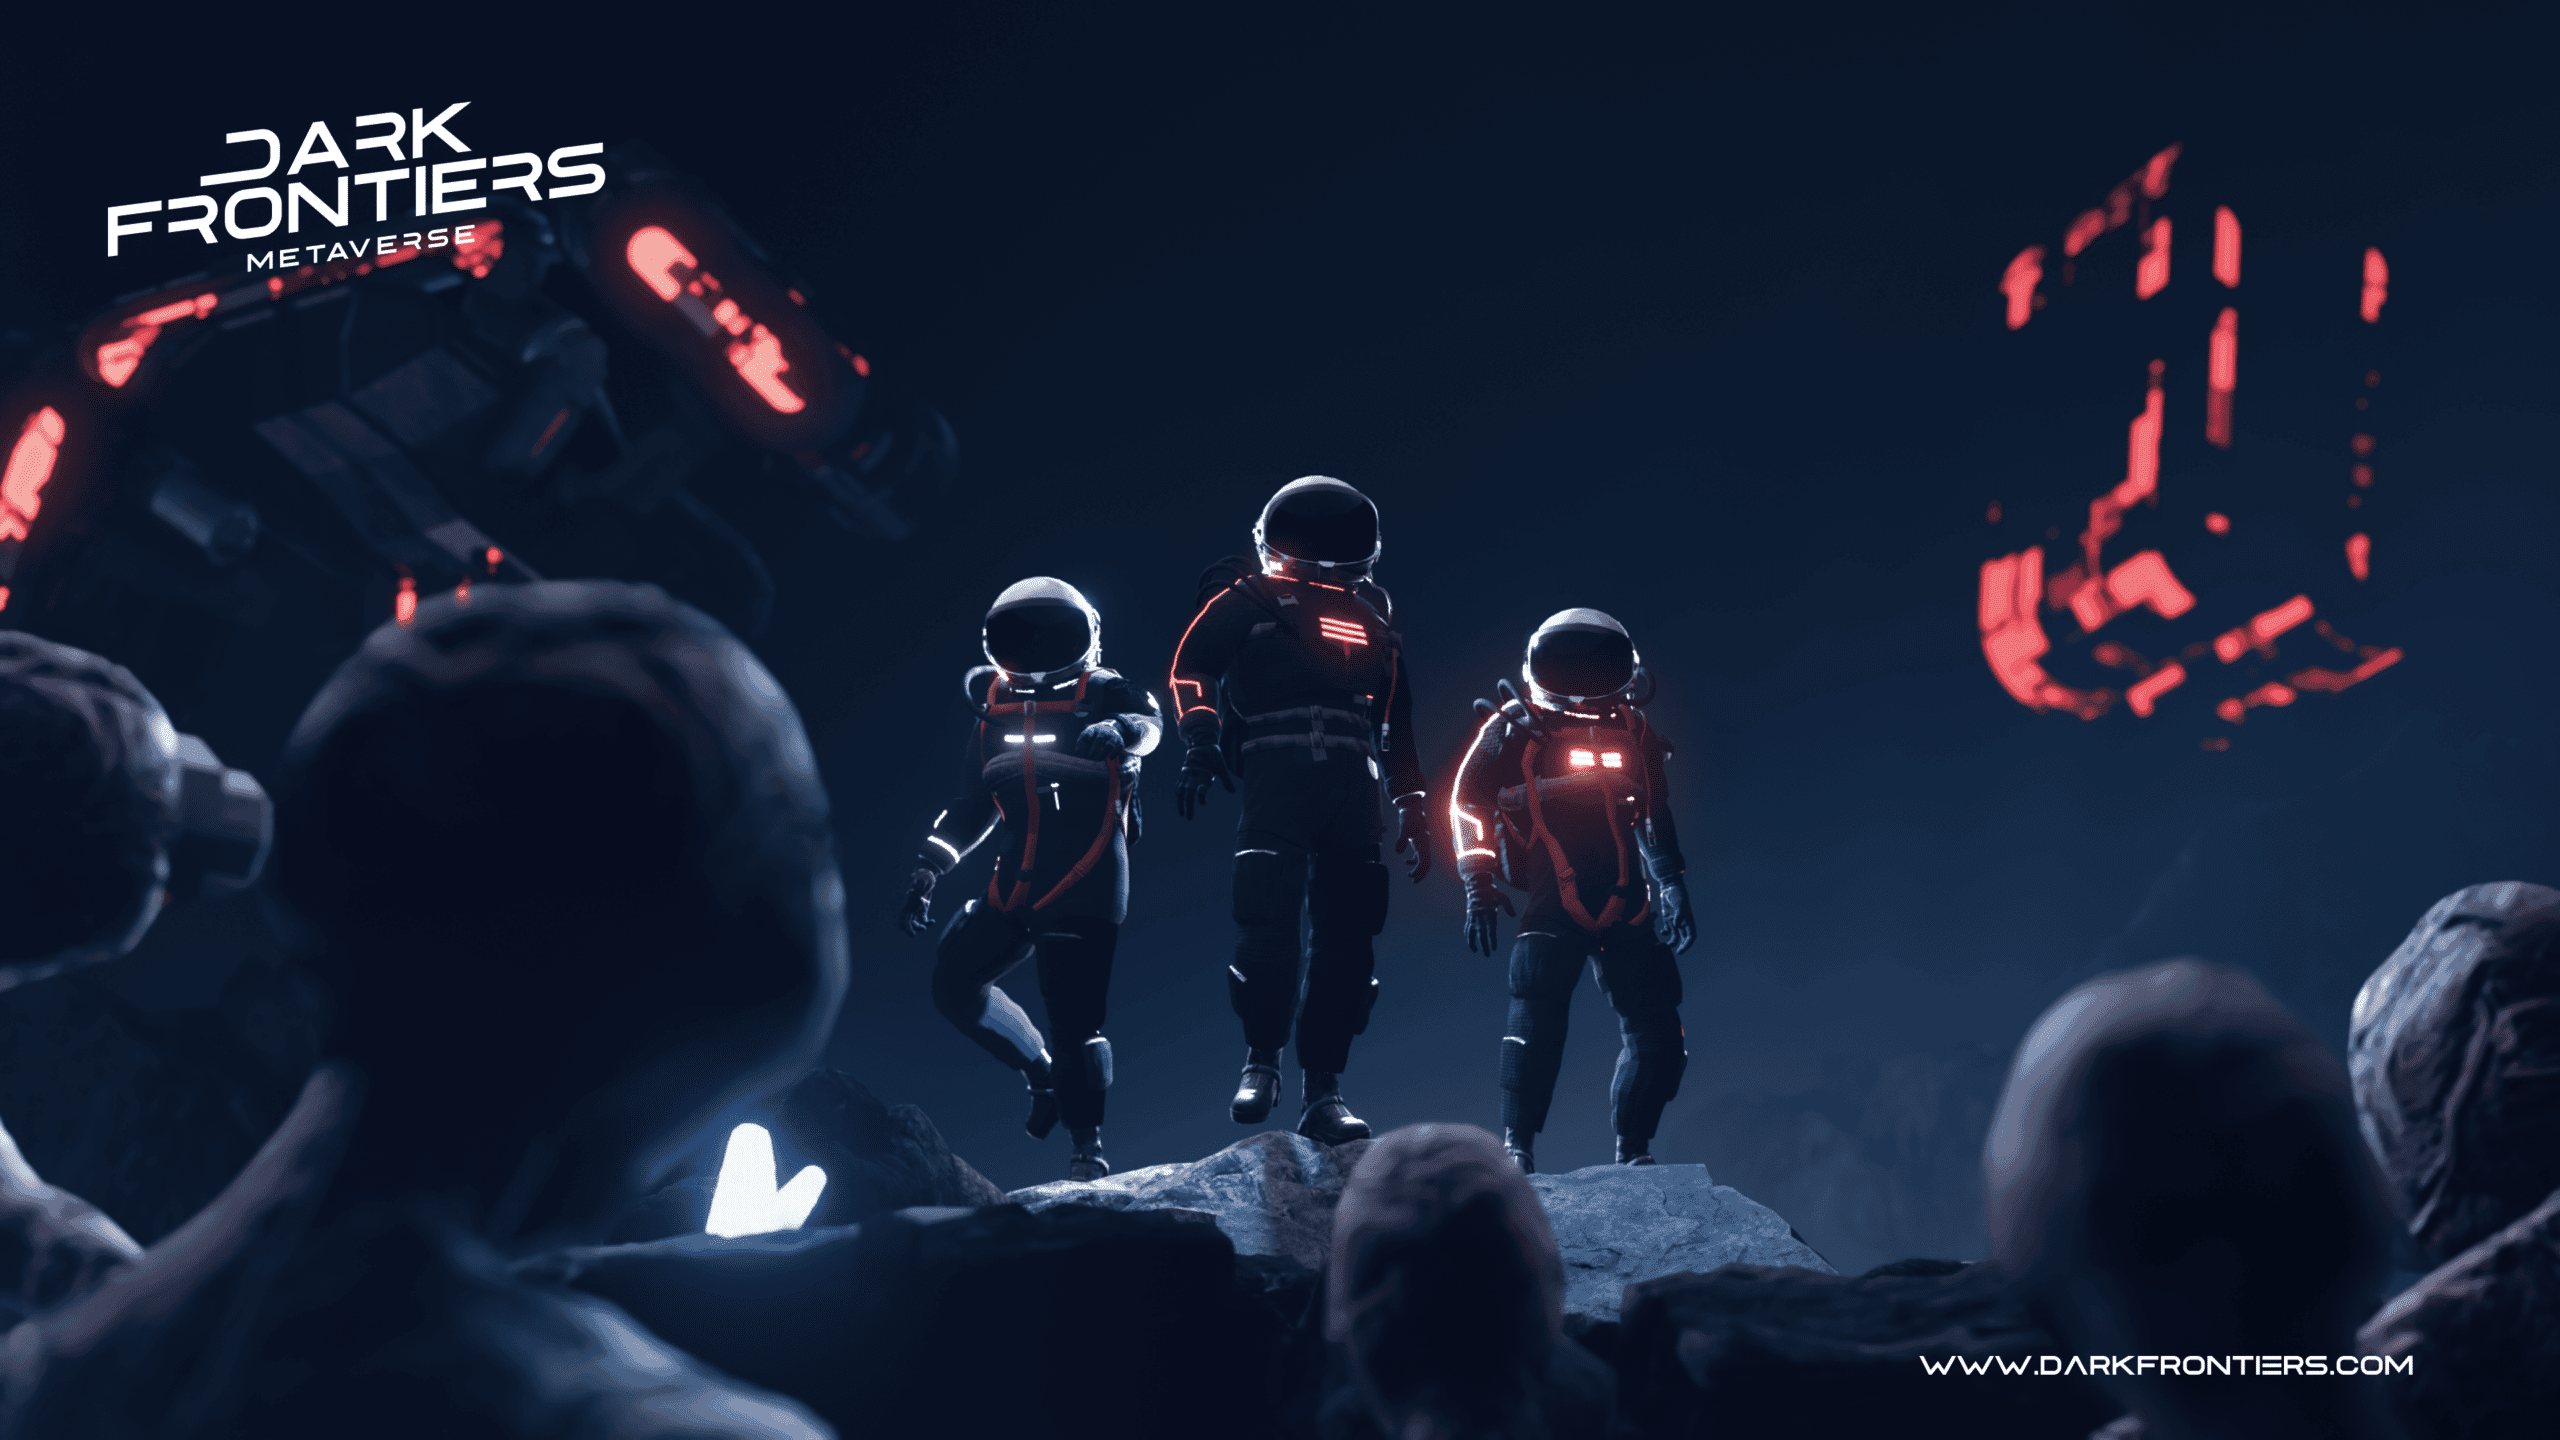 Own a space suit and jump right into the action in this futuristic sci-fi space NFT game, "Dark Frontiers." It is the newest, gamified space realm governed by Gamestarter produced DAO.